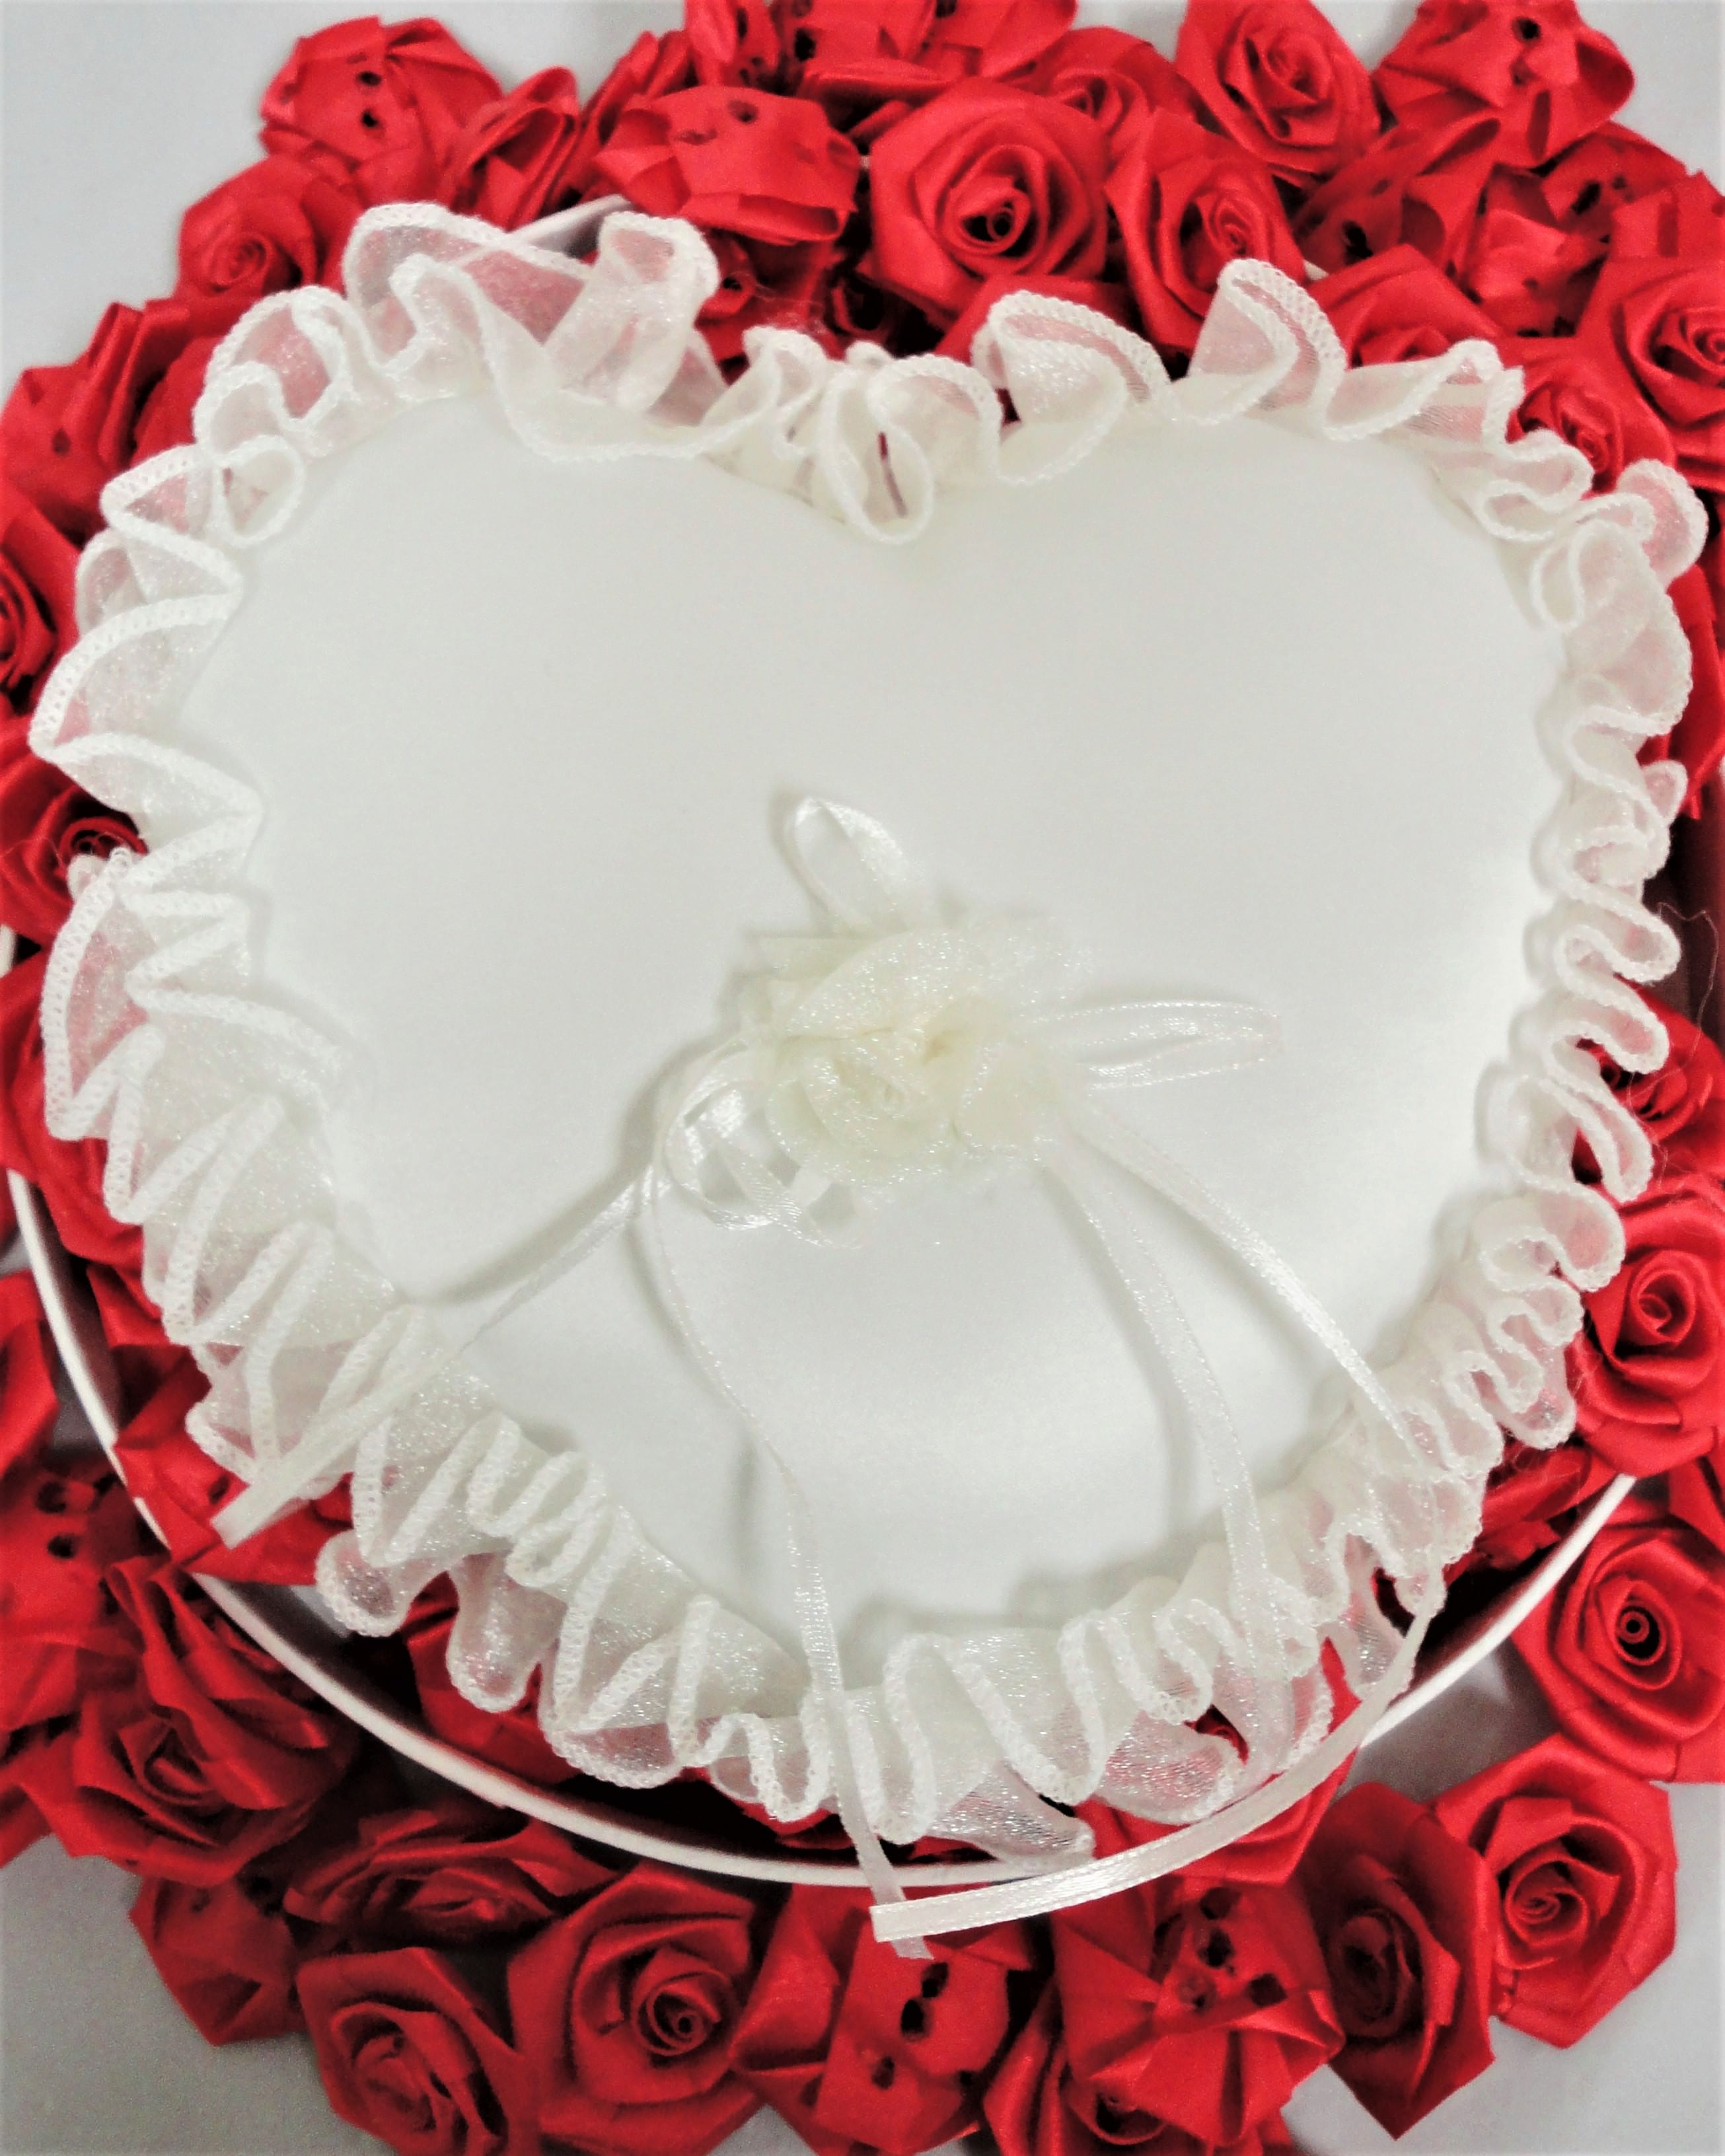 Bridal Wedding Ceremony Ring Bearer Pillow Cushion Crystal Double Heart Q 